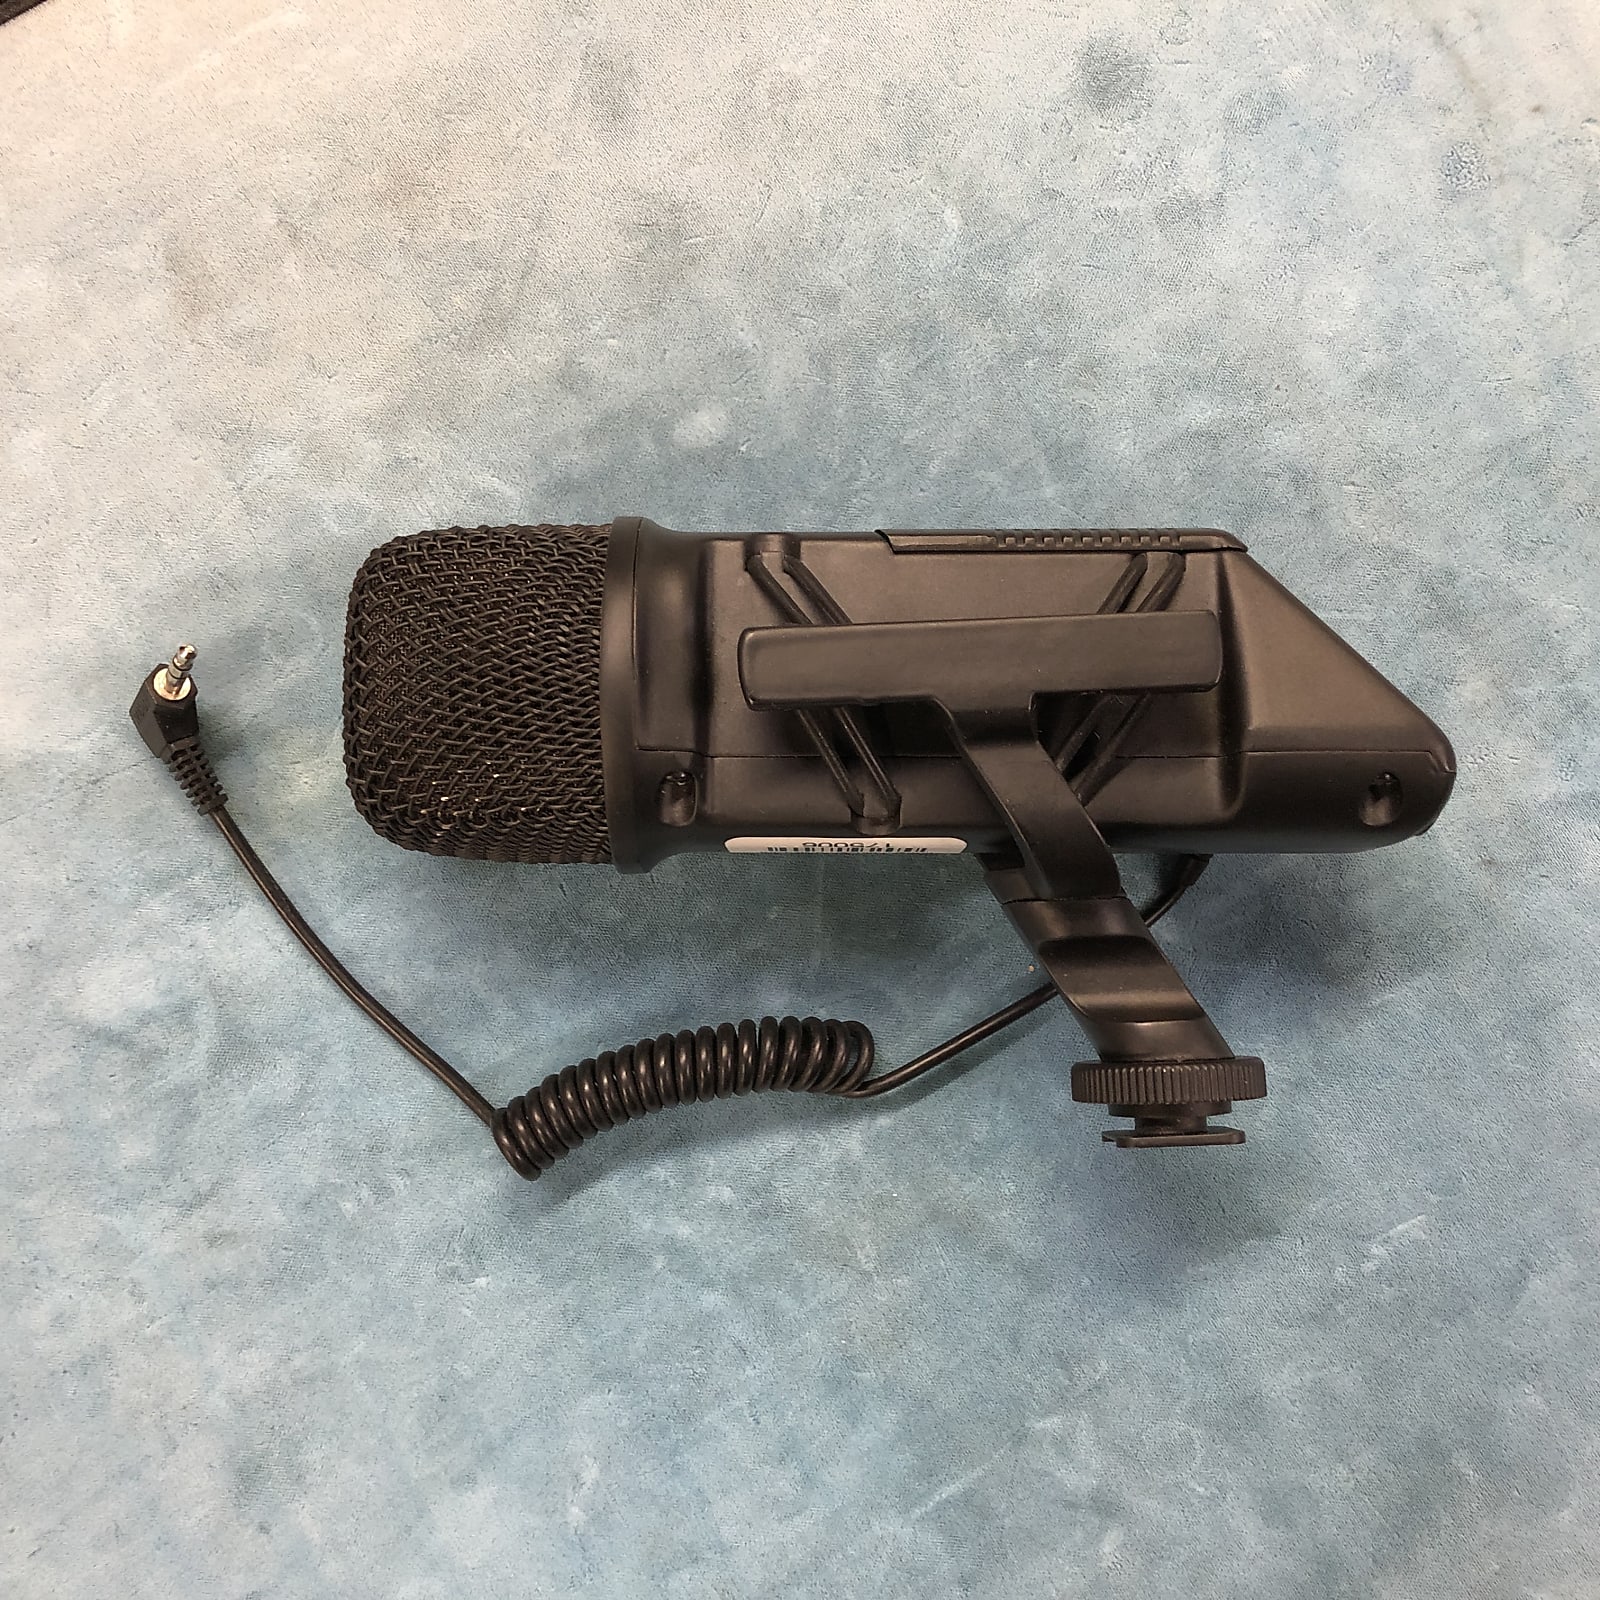 Rode SVM Stereo VideoMic On-Camera Microphone